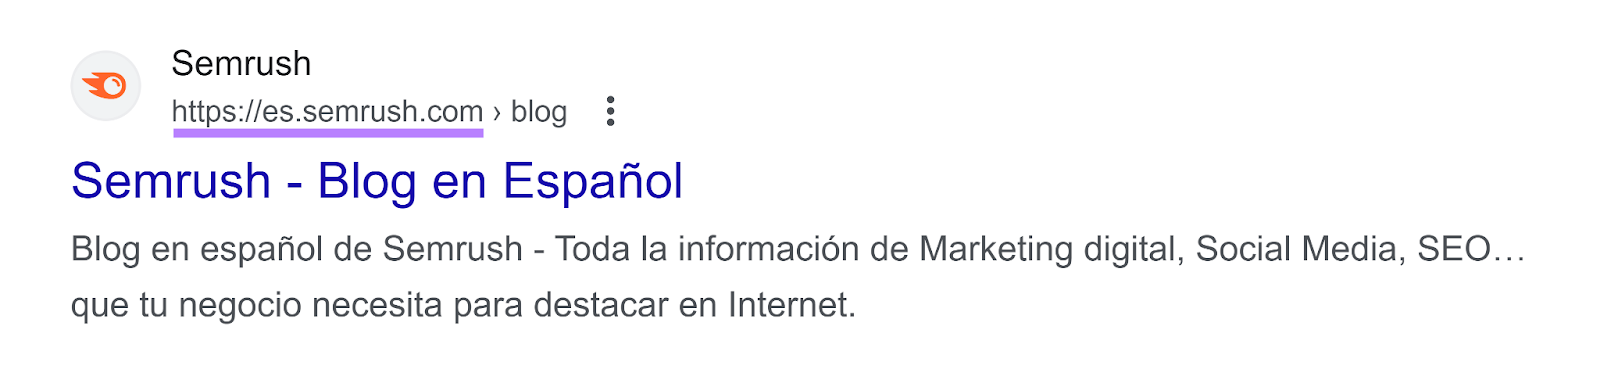 Semrush Blog search result in Spain showing Spanish subdomain.